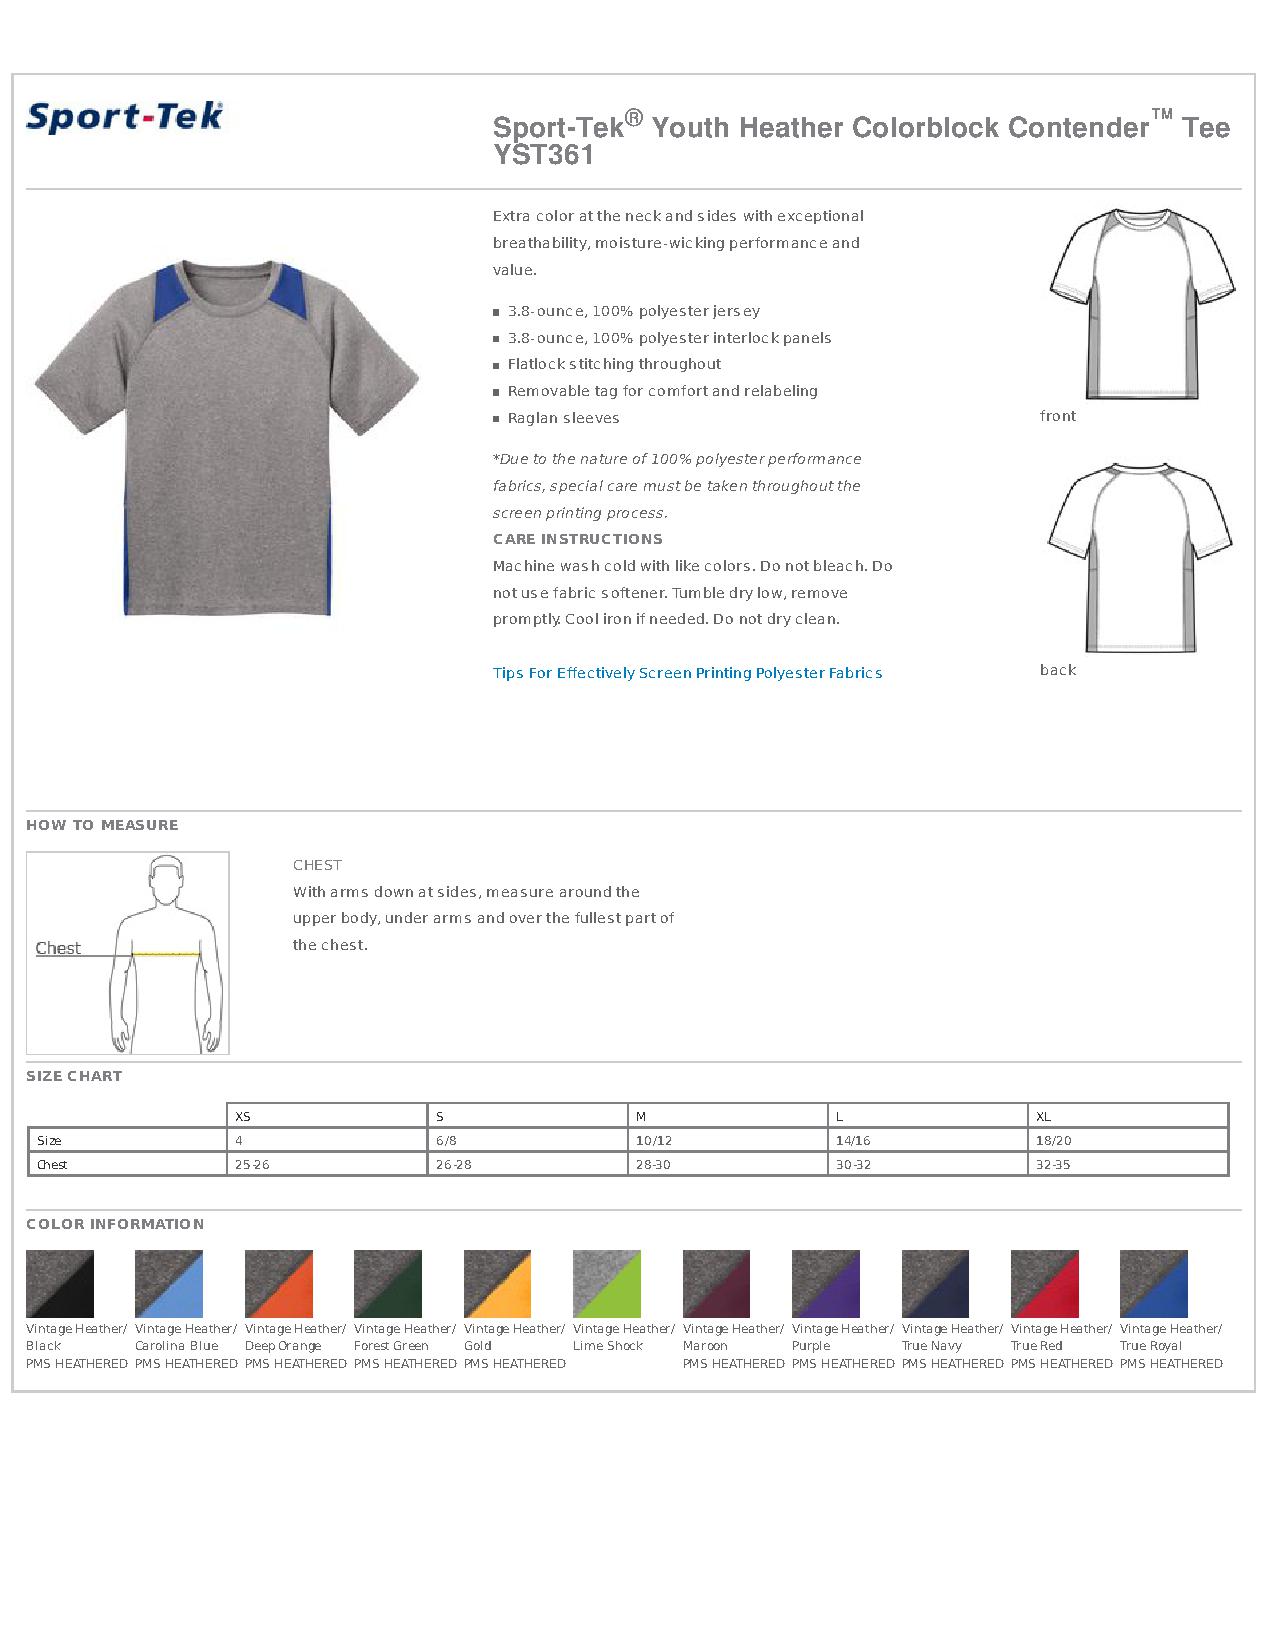 Sport-Tek YST361 - Youth Heather Colorblock Contender Tee - T-Shirts